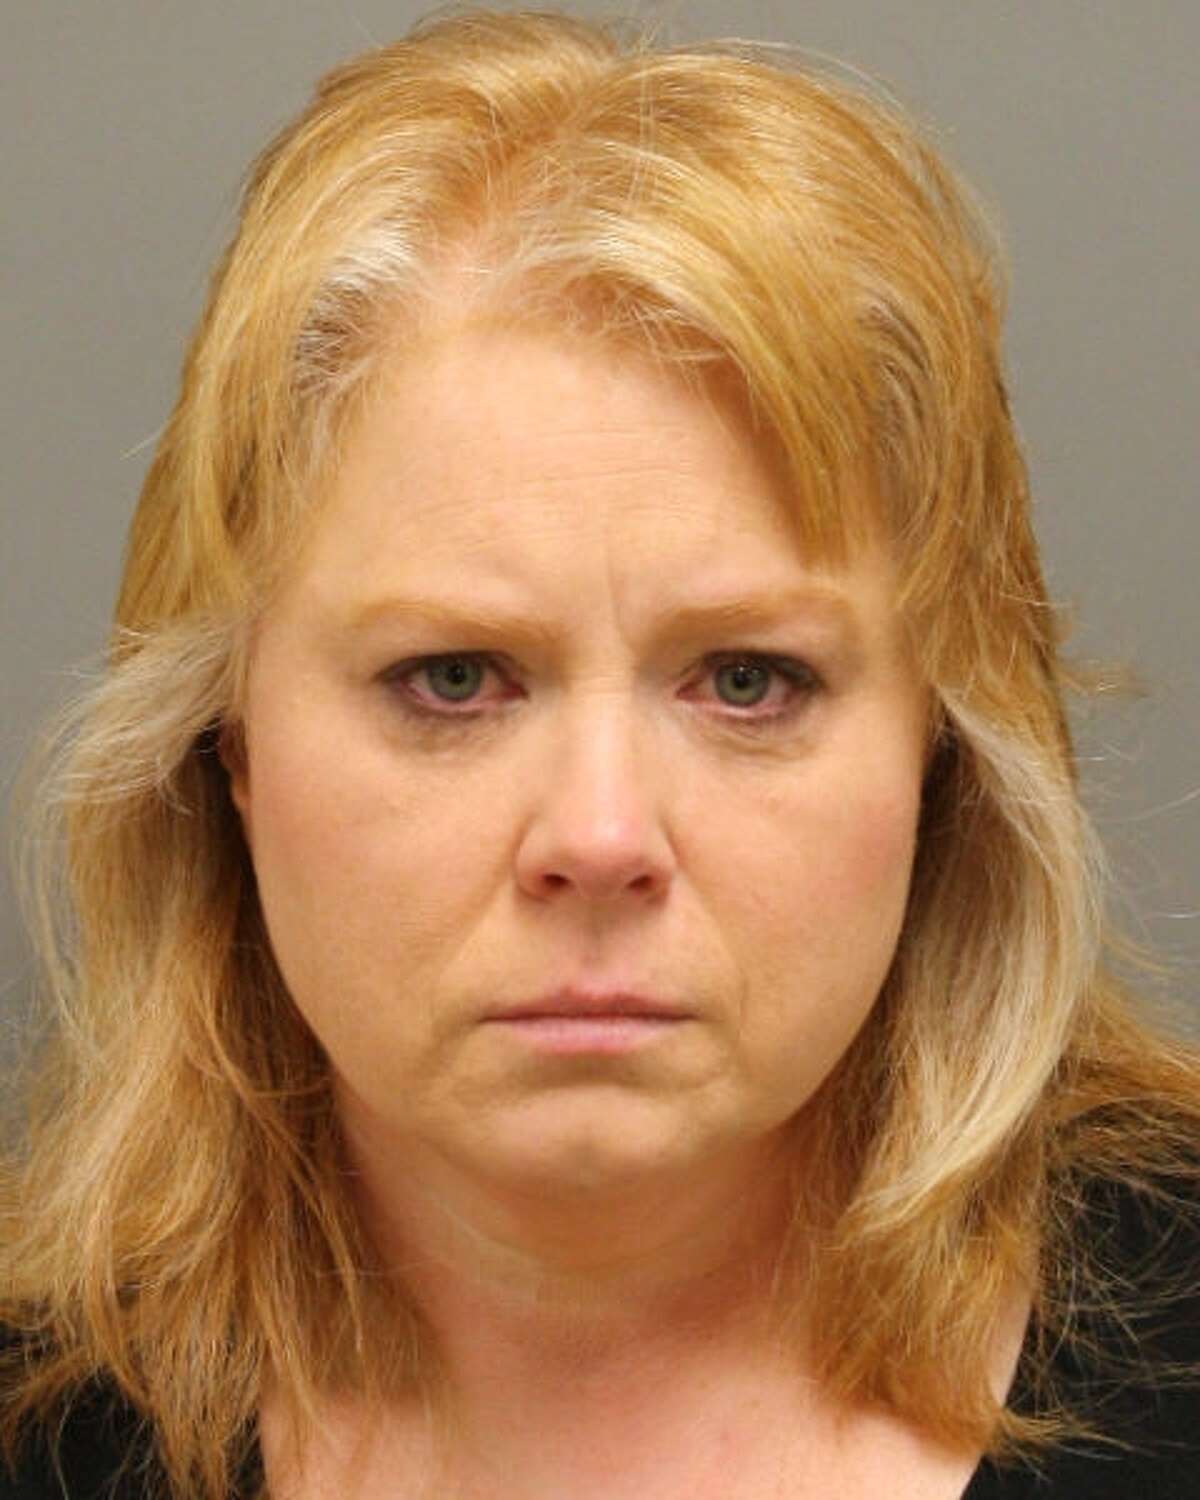 Susan Denise Odell is accused of hurting a 2-month-old baby she was babysitting on June 22. She has been charged with injury to a child.